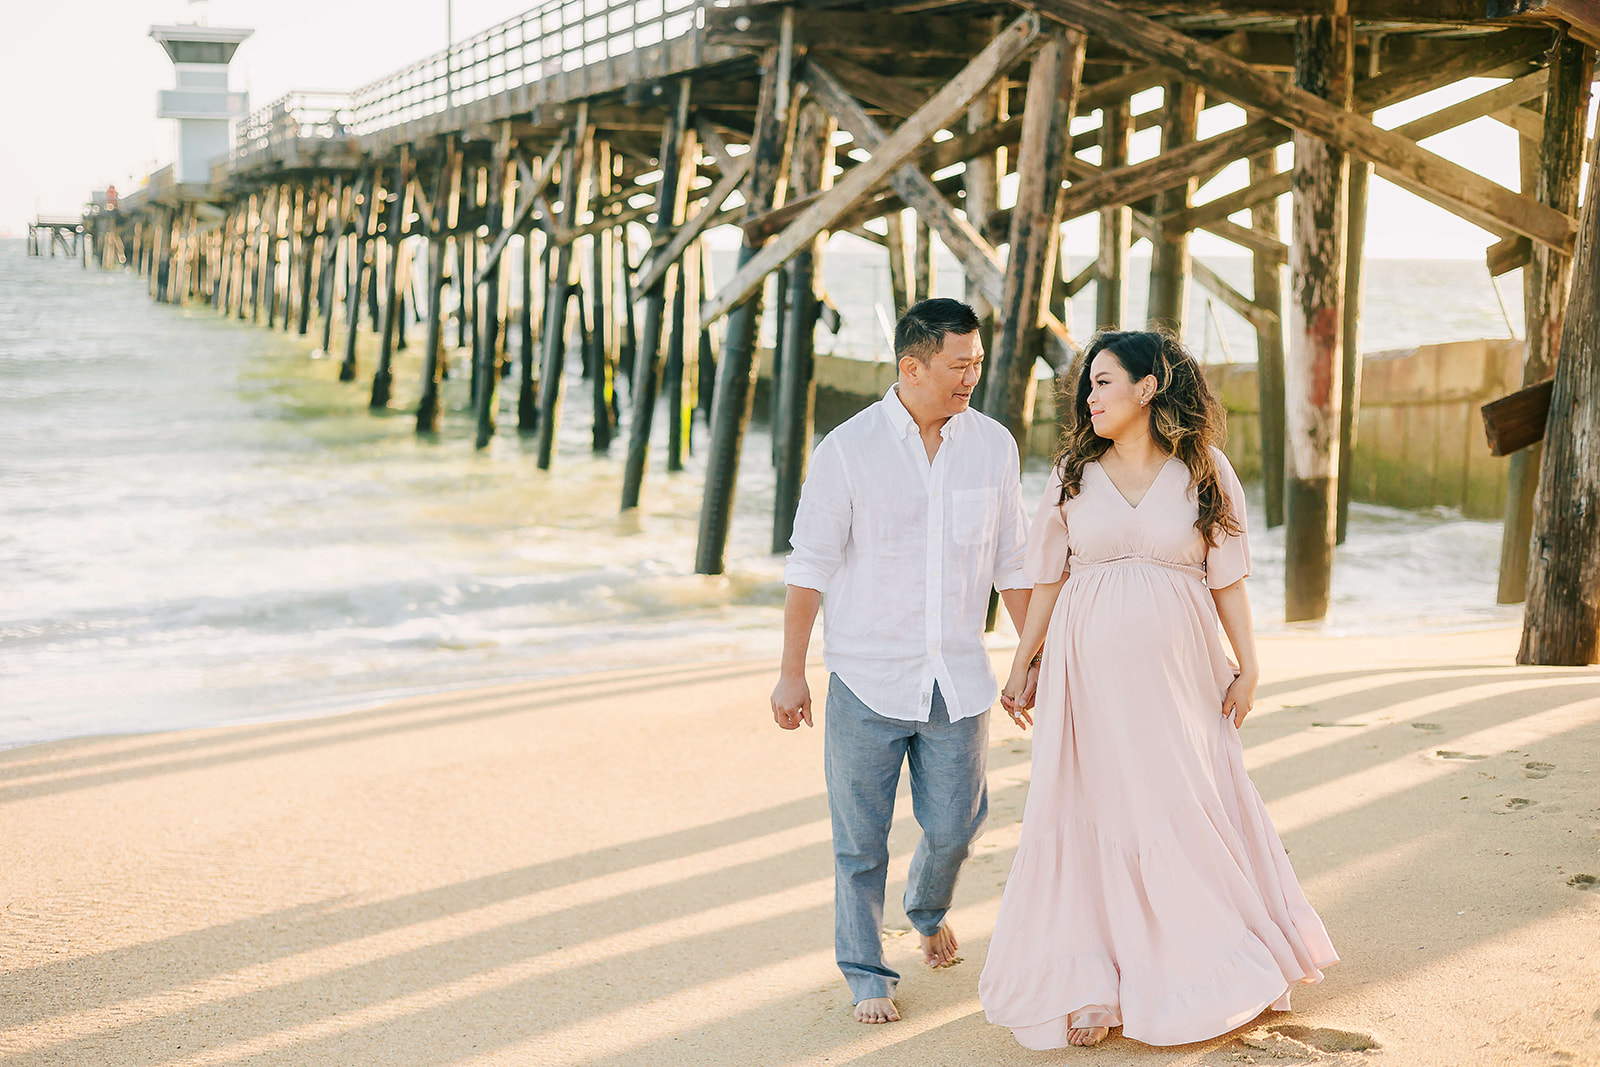 A mother-to-be walks under the pier on a beach while holding hands with her husband